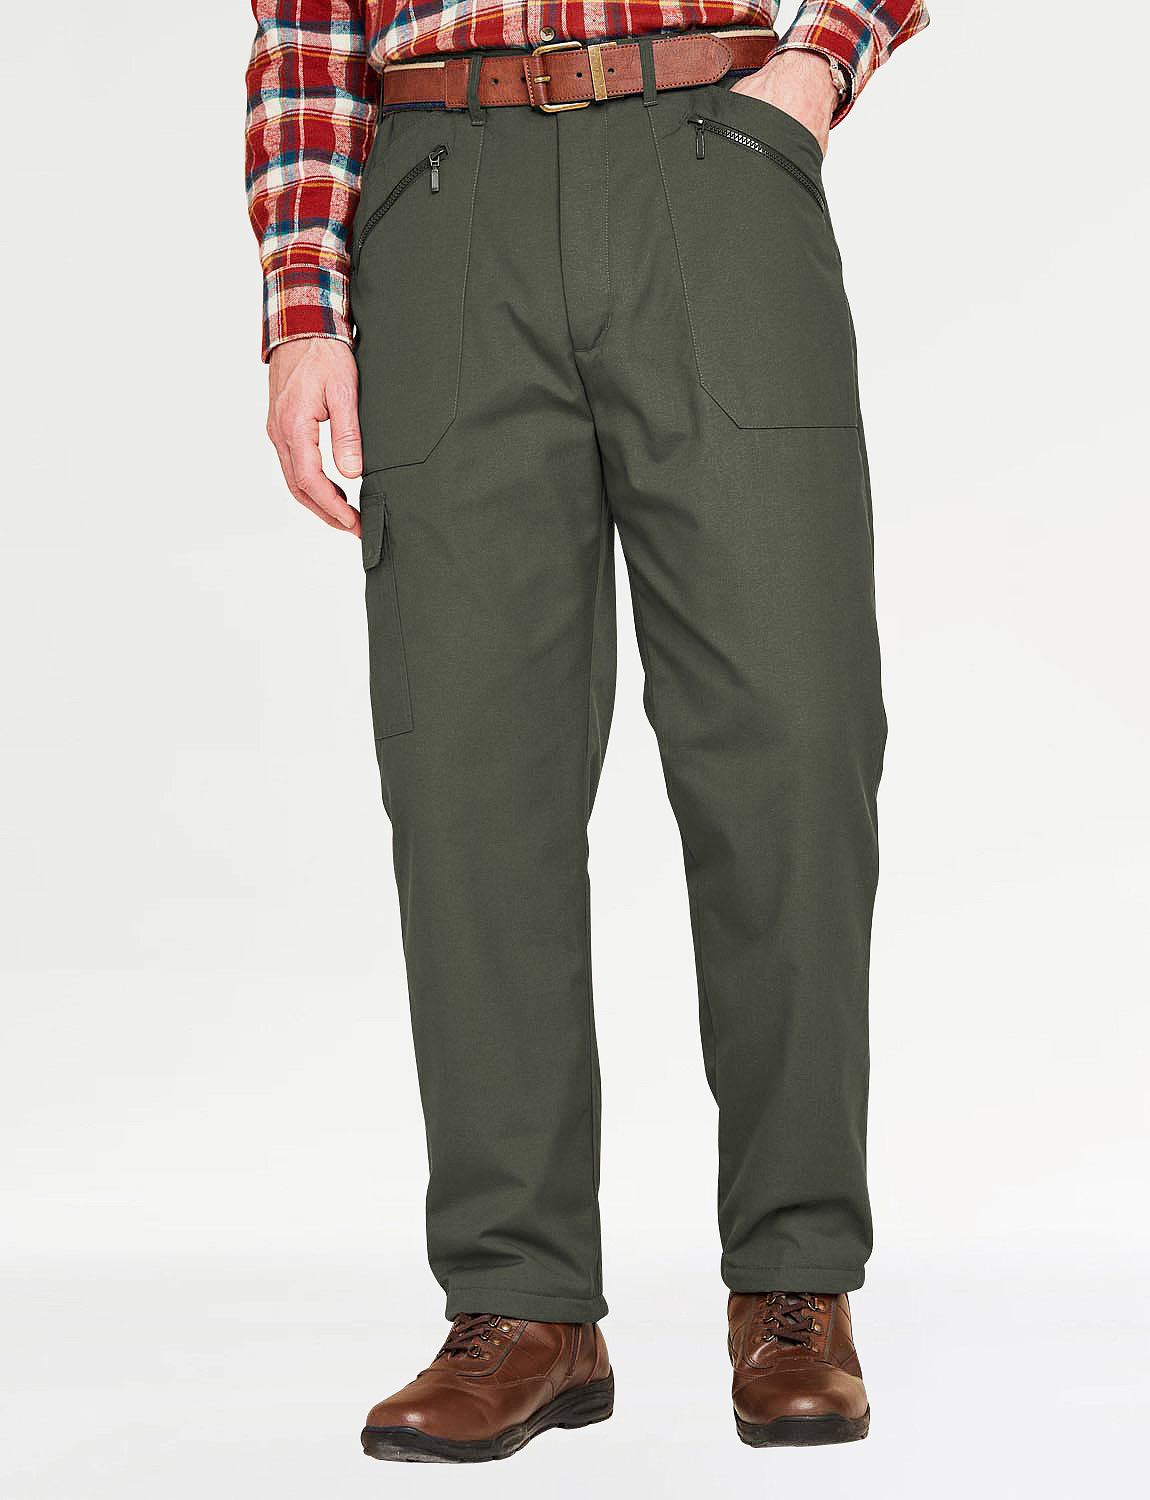 Fleece Lined Action Trouser | Chums